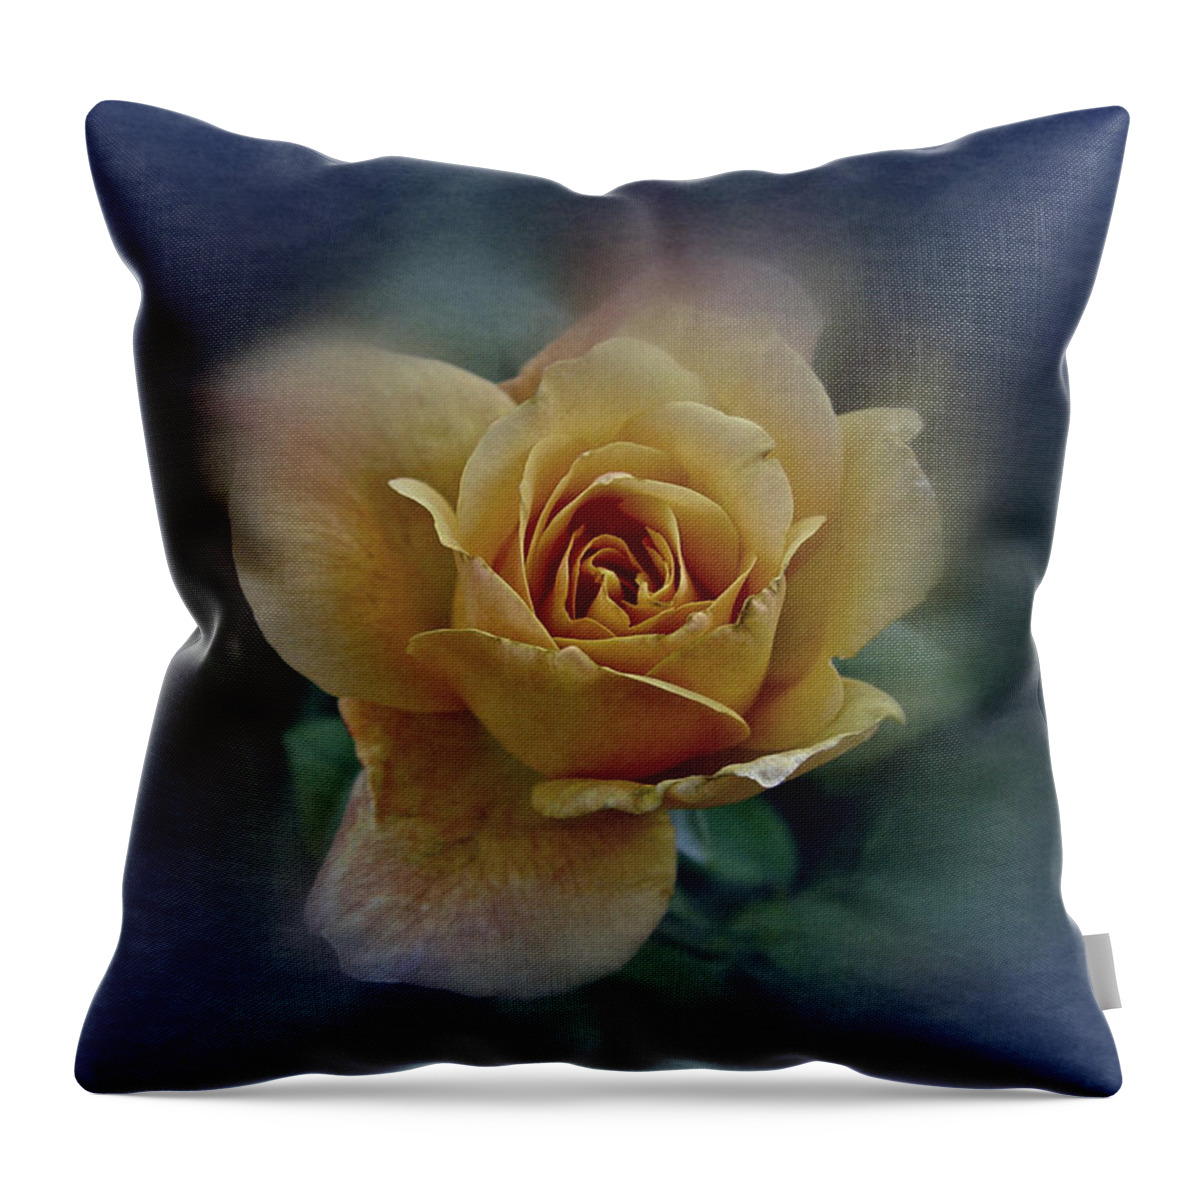 Rose Throw Pillow featuring the photograph Mid September Rose by Richard Cummings